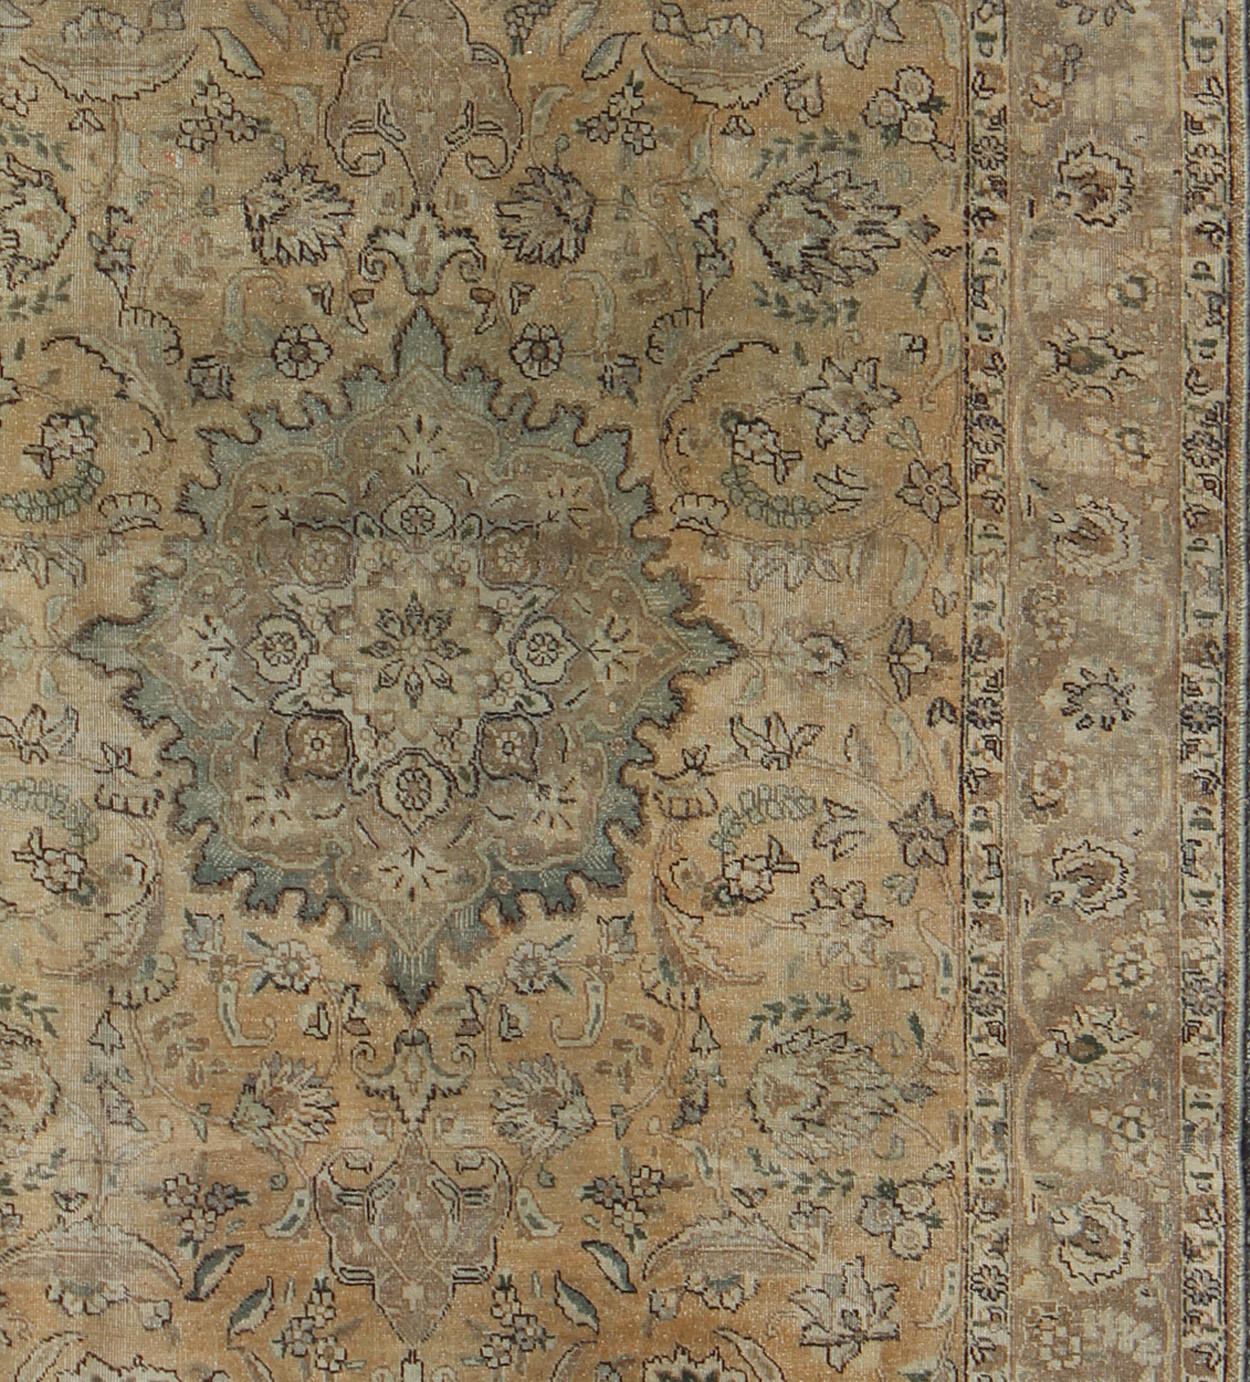 Persian rug Tabriz style with floral medallion design in Shades of Tan, Taupe, cream and tan, rug H-703-02, country of origin / type: Iran / Tabriz, circa 1950.

This Persian Tabriz carpet (circa 1950) features a refined palate of various shades